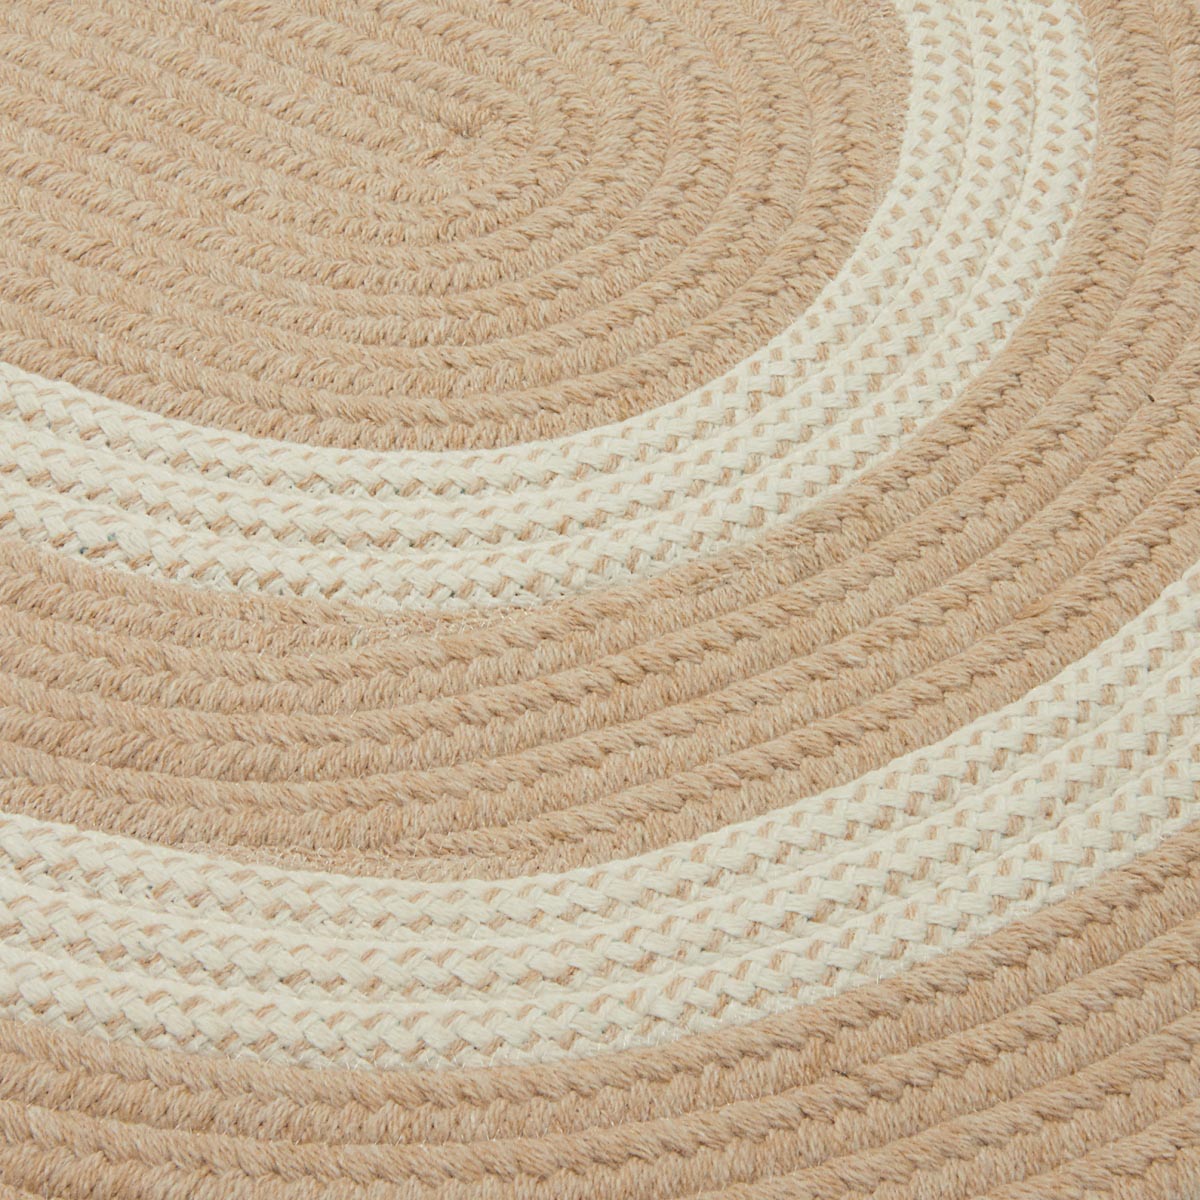 Graywood Natural Outdoor Braided Oval Rugs